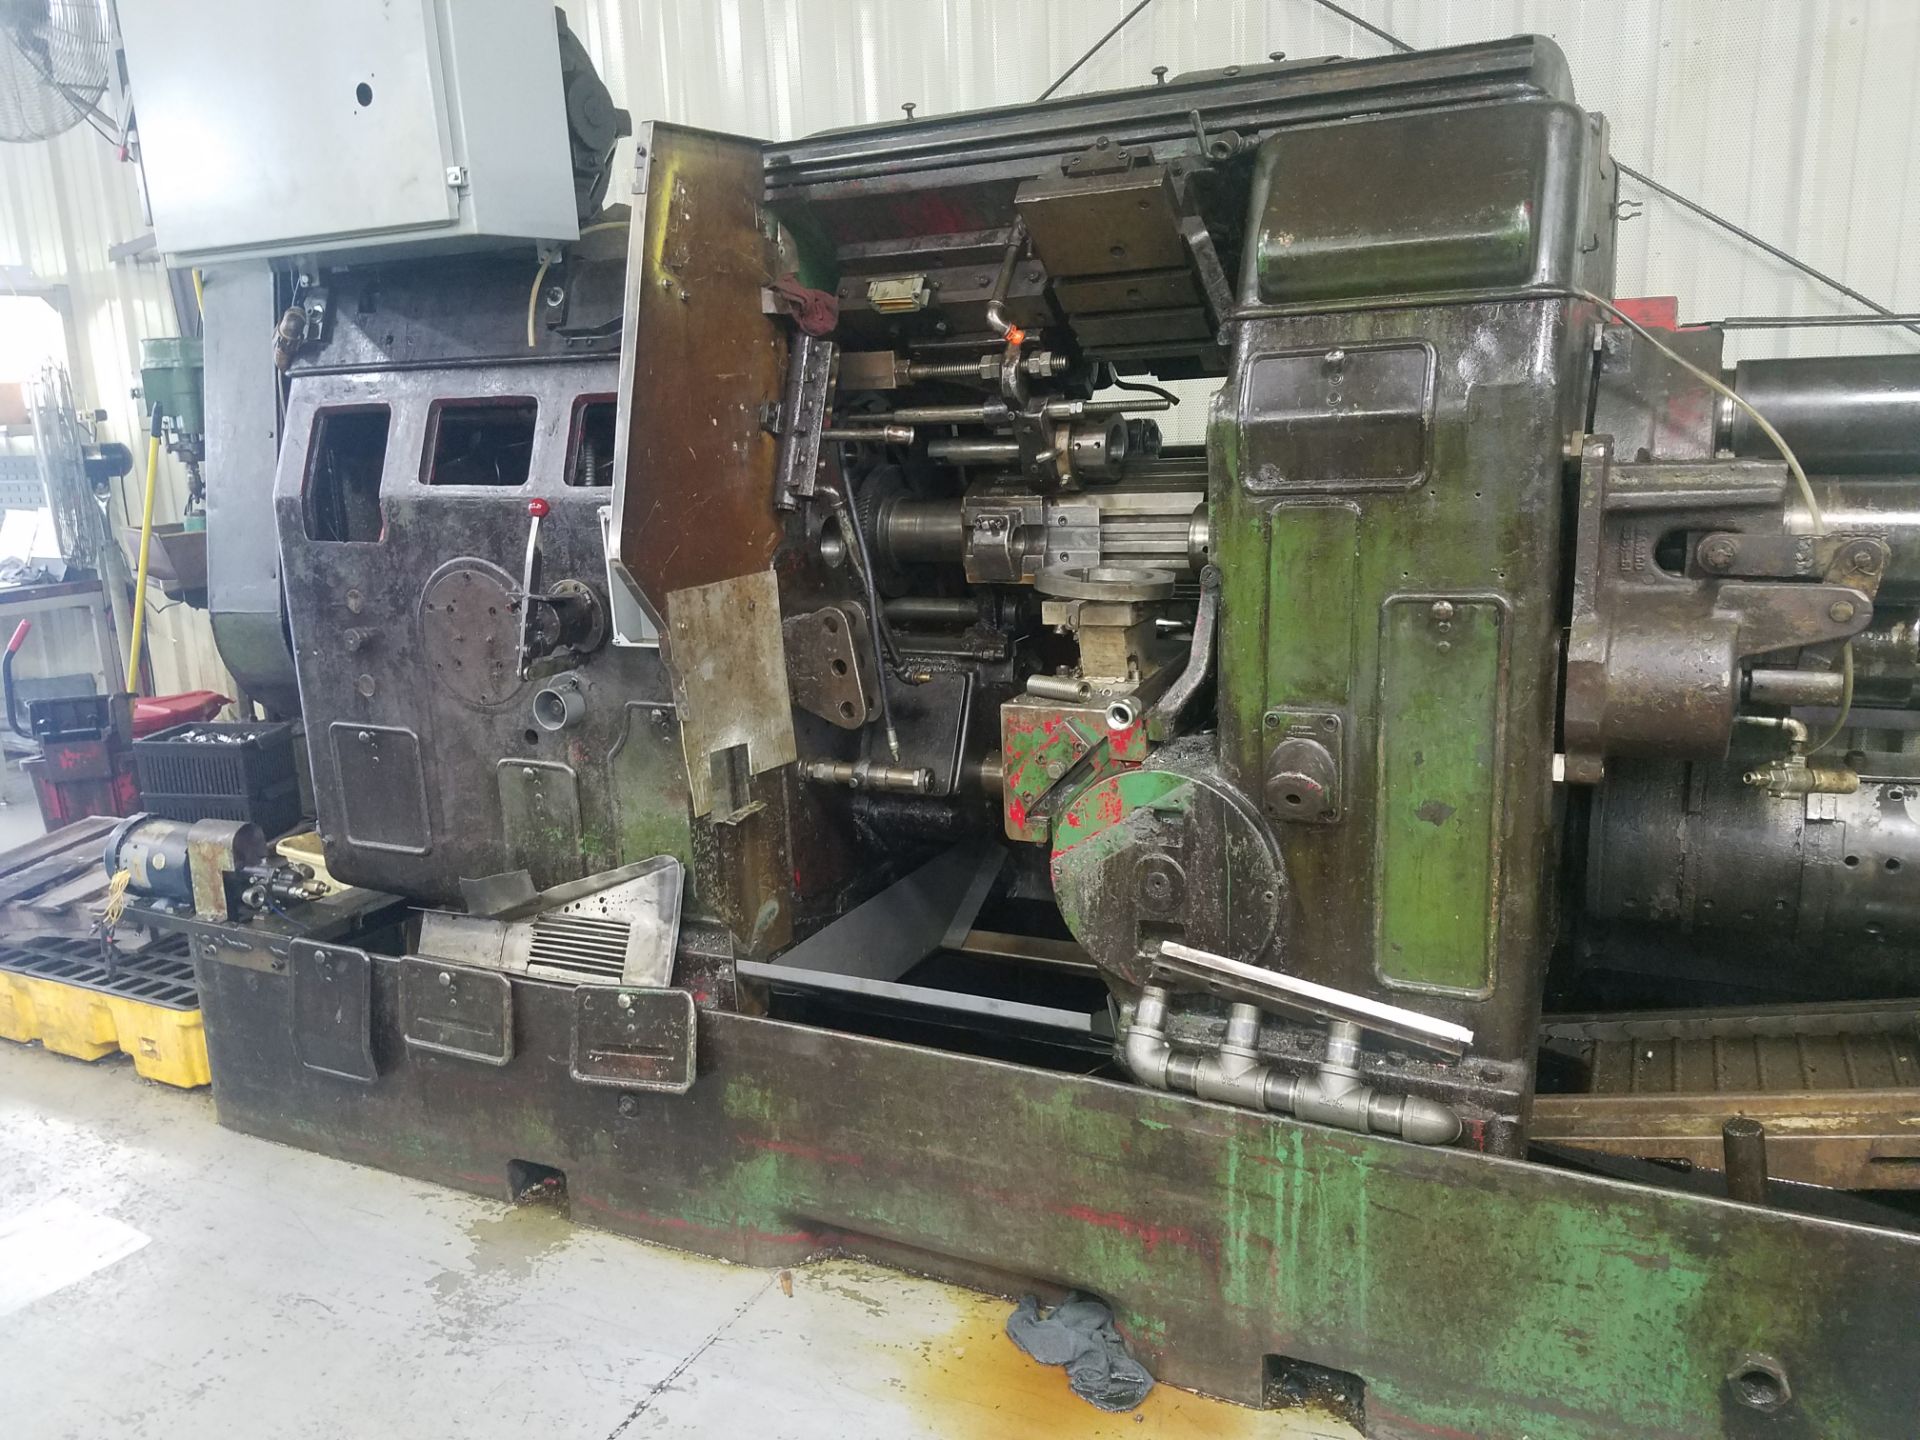 Acme Gridley RB6 Automatic Screw Machine, s/n 41397, 1 5/8 In., Chucker, 6 Spindle, Loading Fee